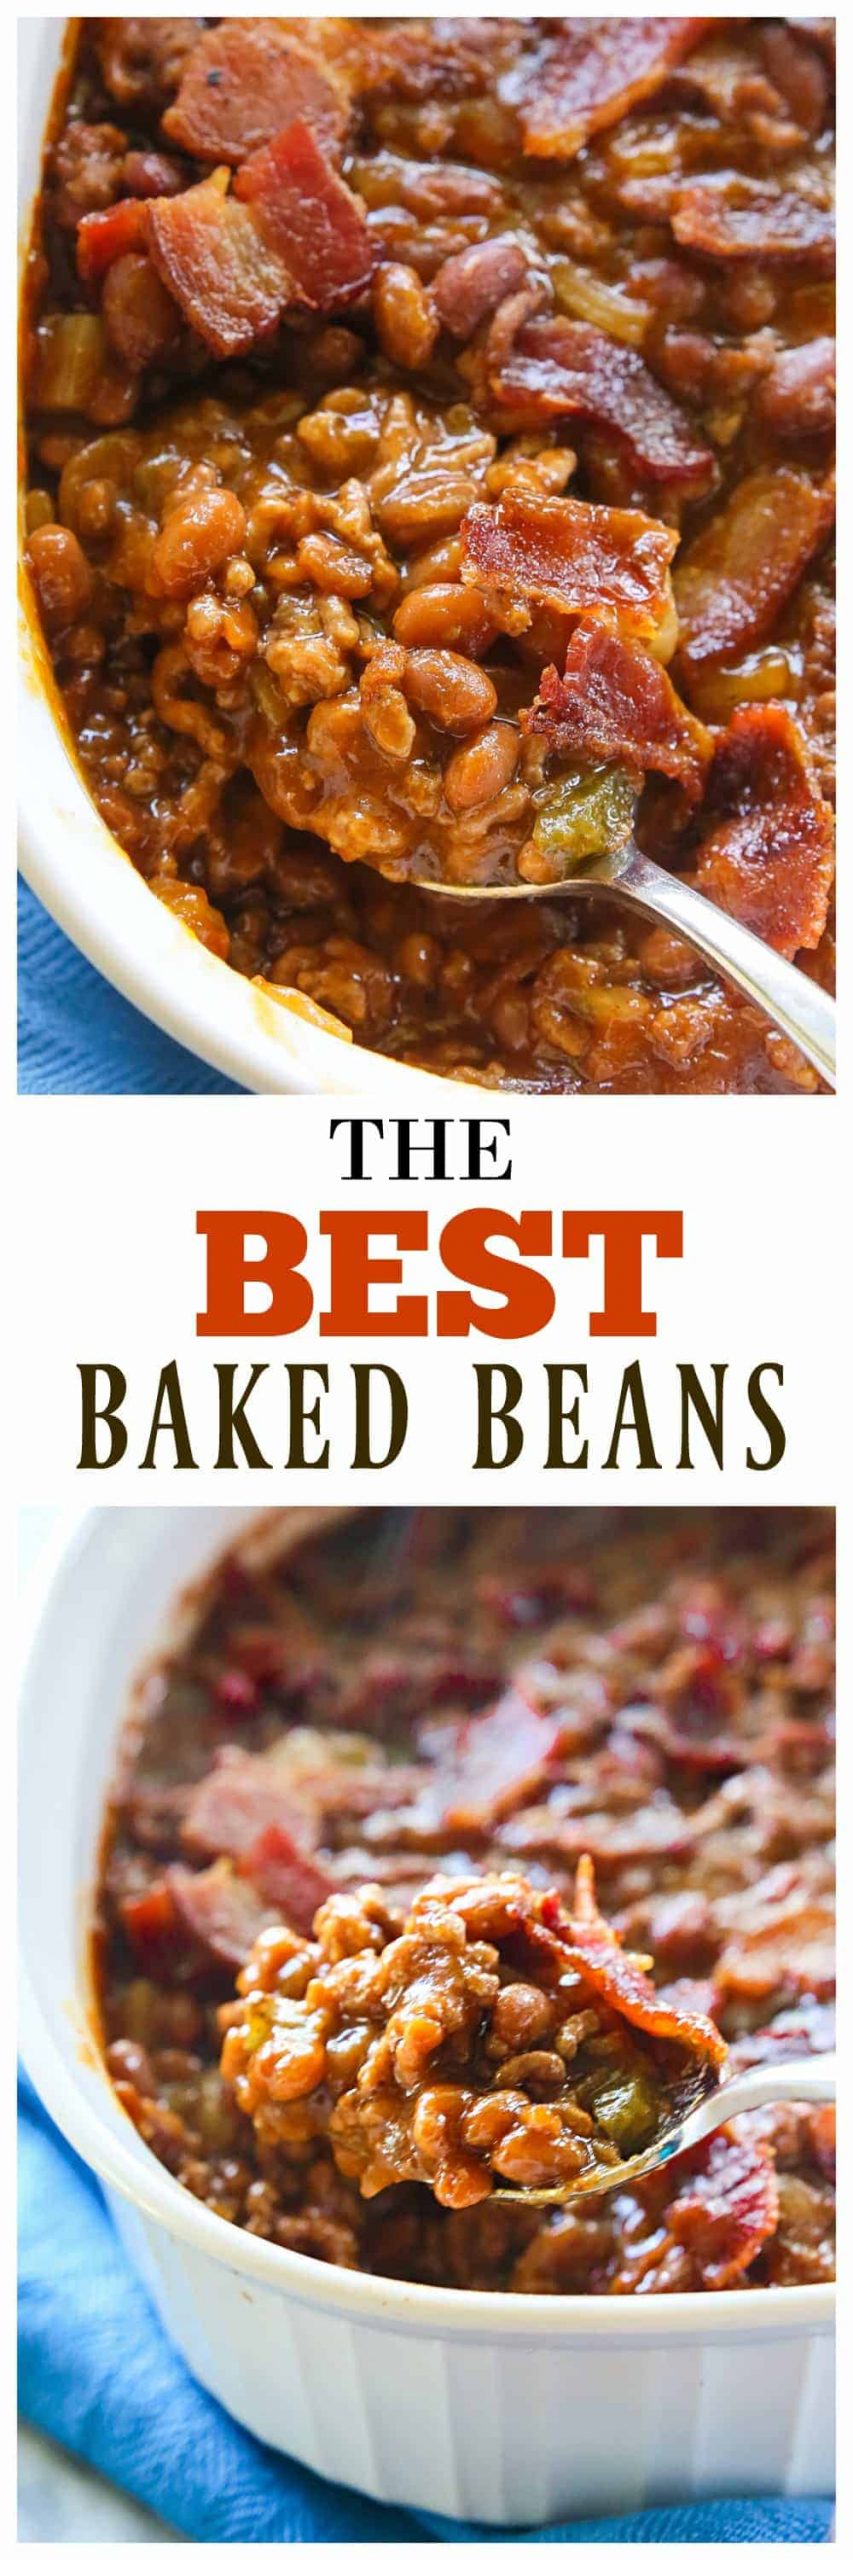 The Best Baked Beans - hearty and thick and always a winner at BBQs, potlucks, and parties. The perfect side dish. #baked #beans #recipe #homemade #BBQ #sidedish